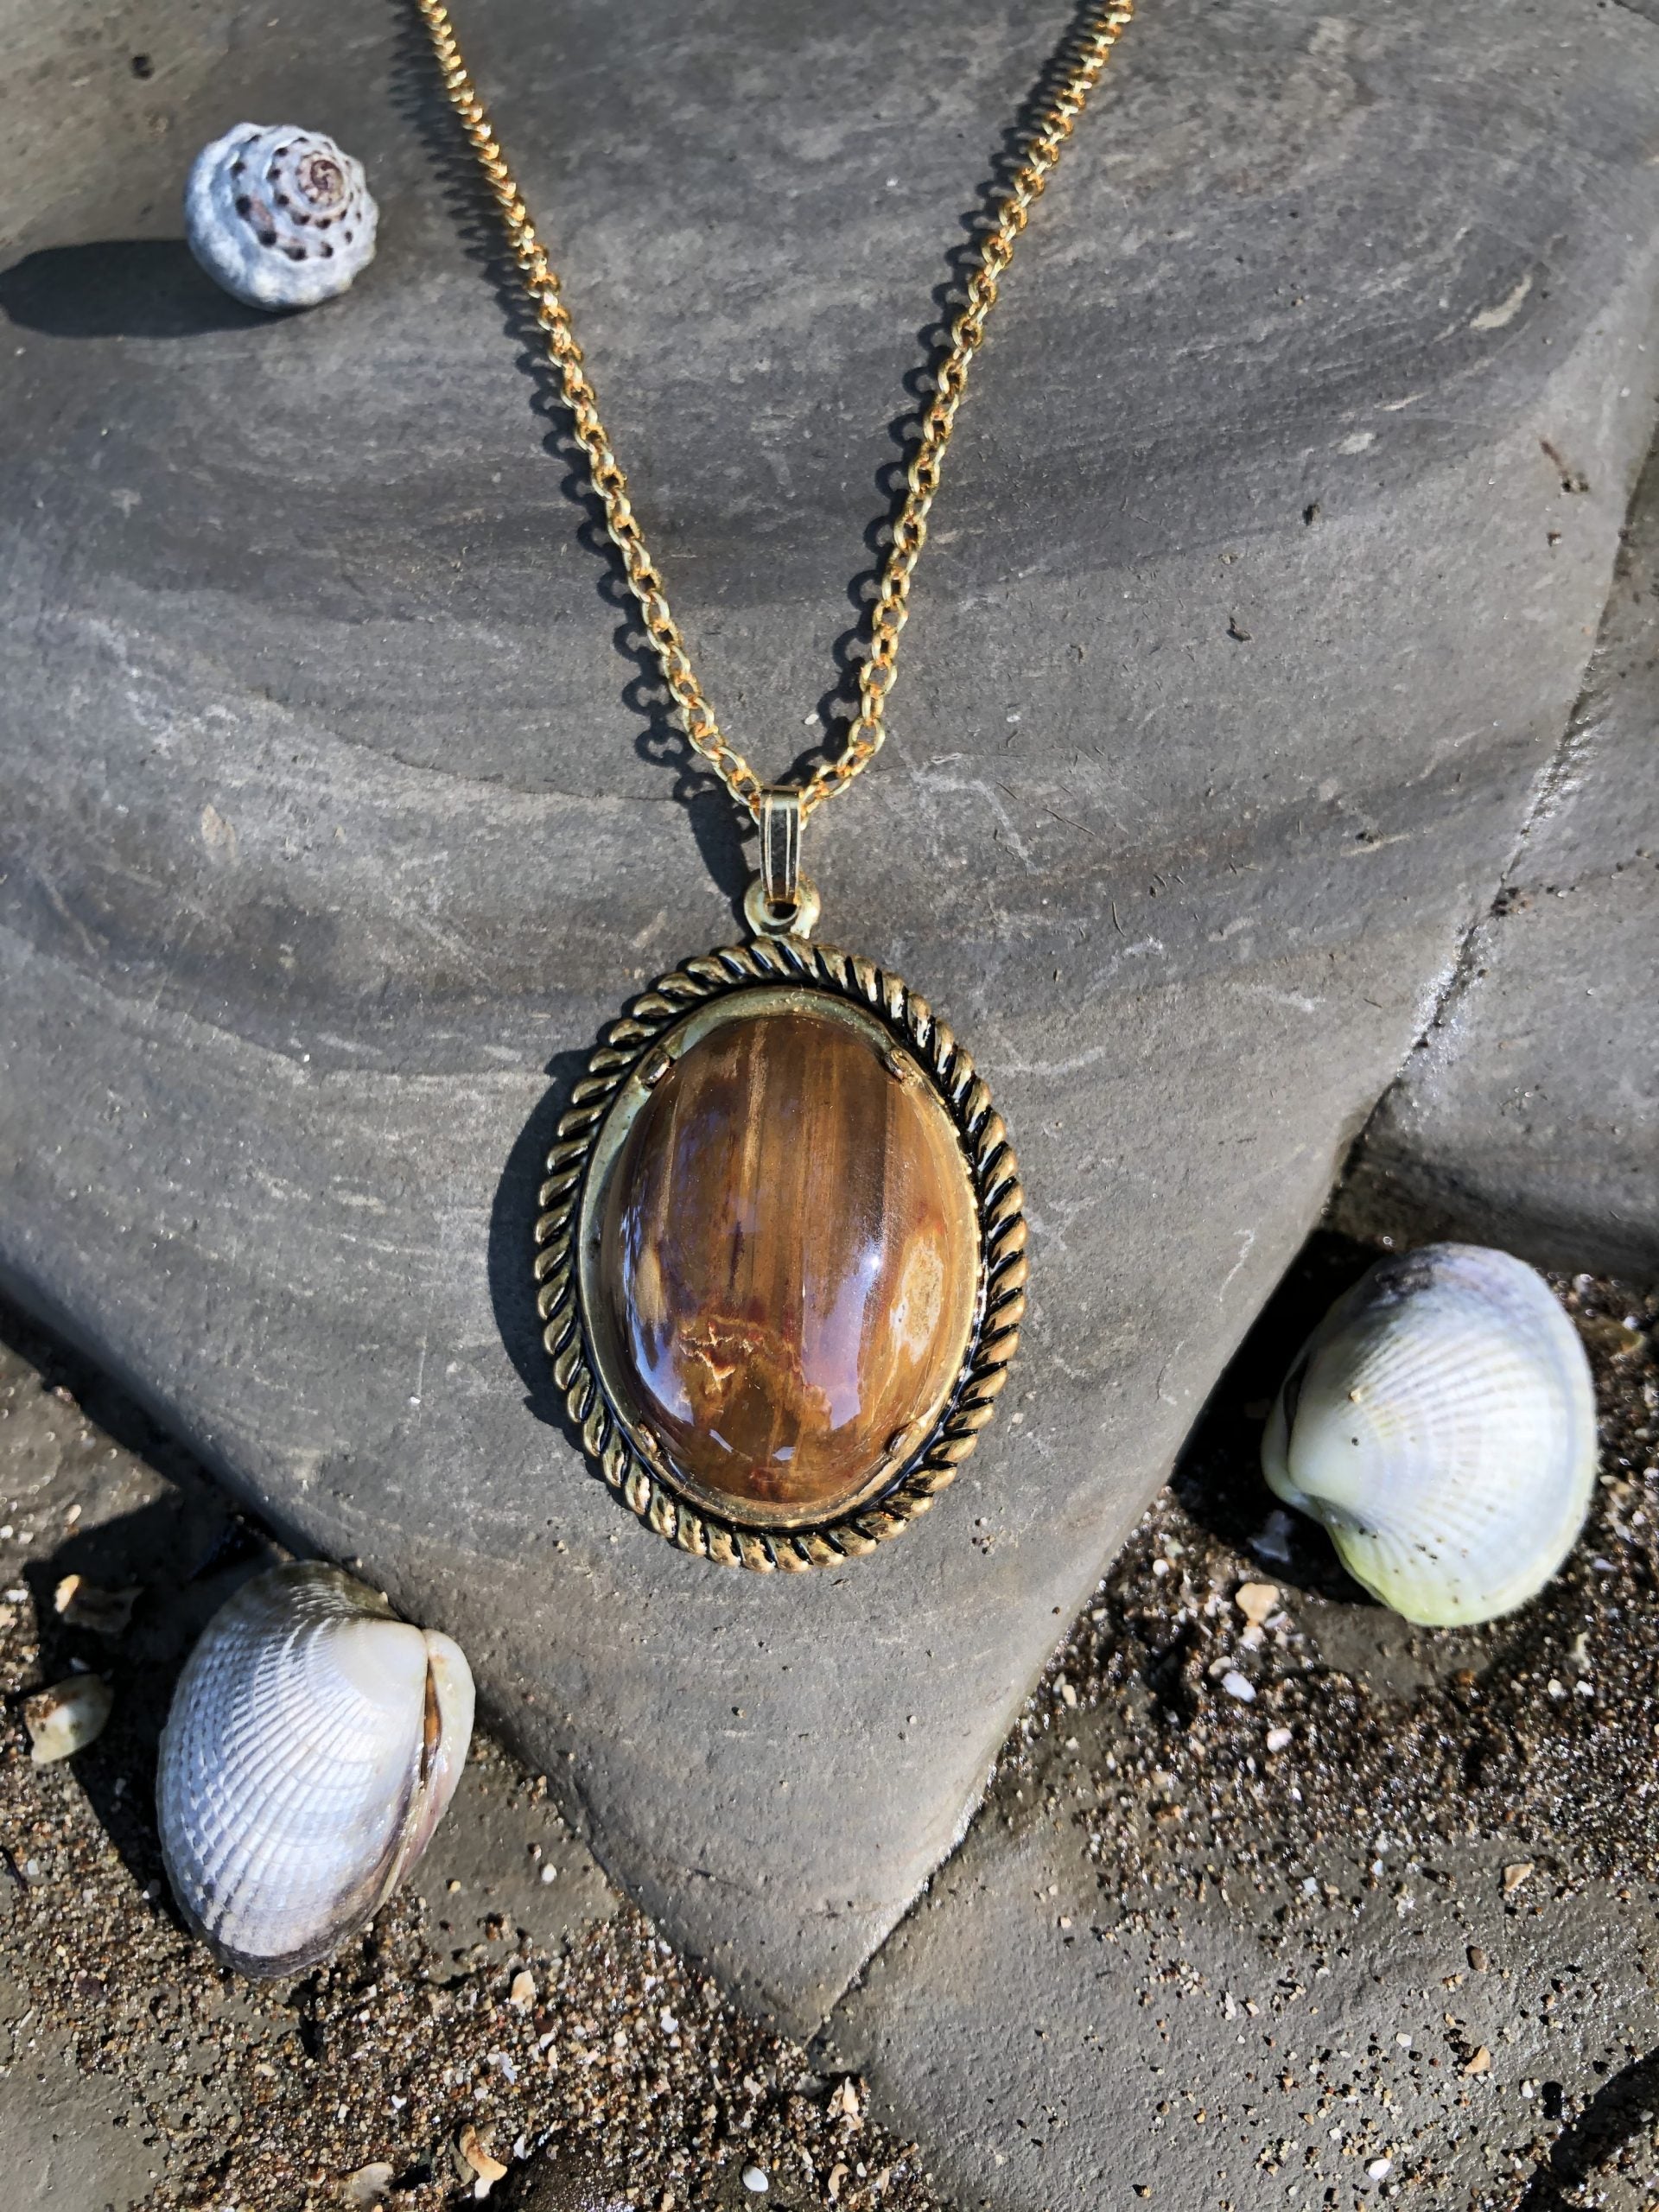 Necklace with Australian petrified wood showing beautiful grain patterns in lovely wood-tones of brown and tan, hand polished to a 25x18mm cabochon and set in a gold plated setting with 19 inch chain, close